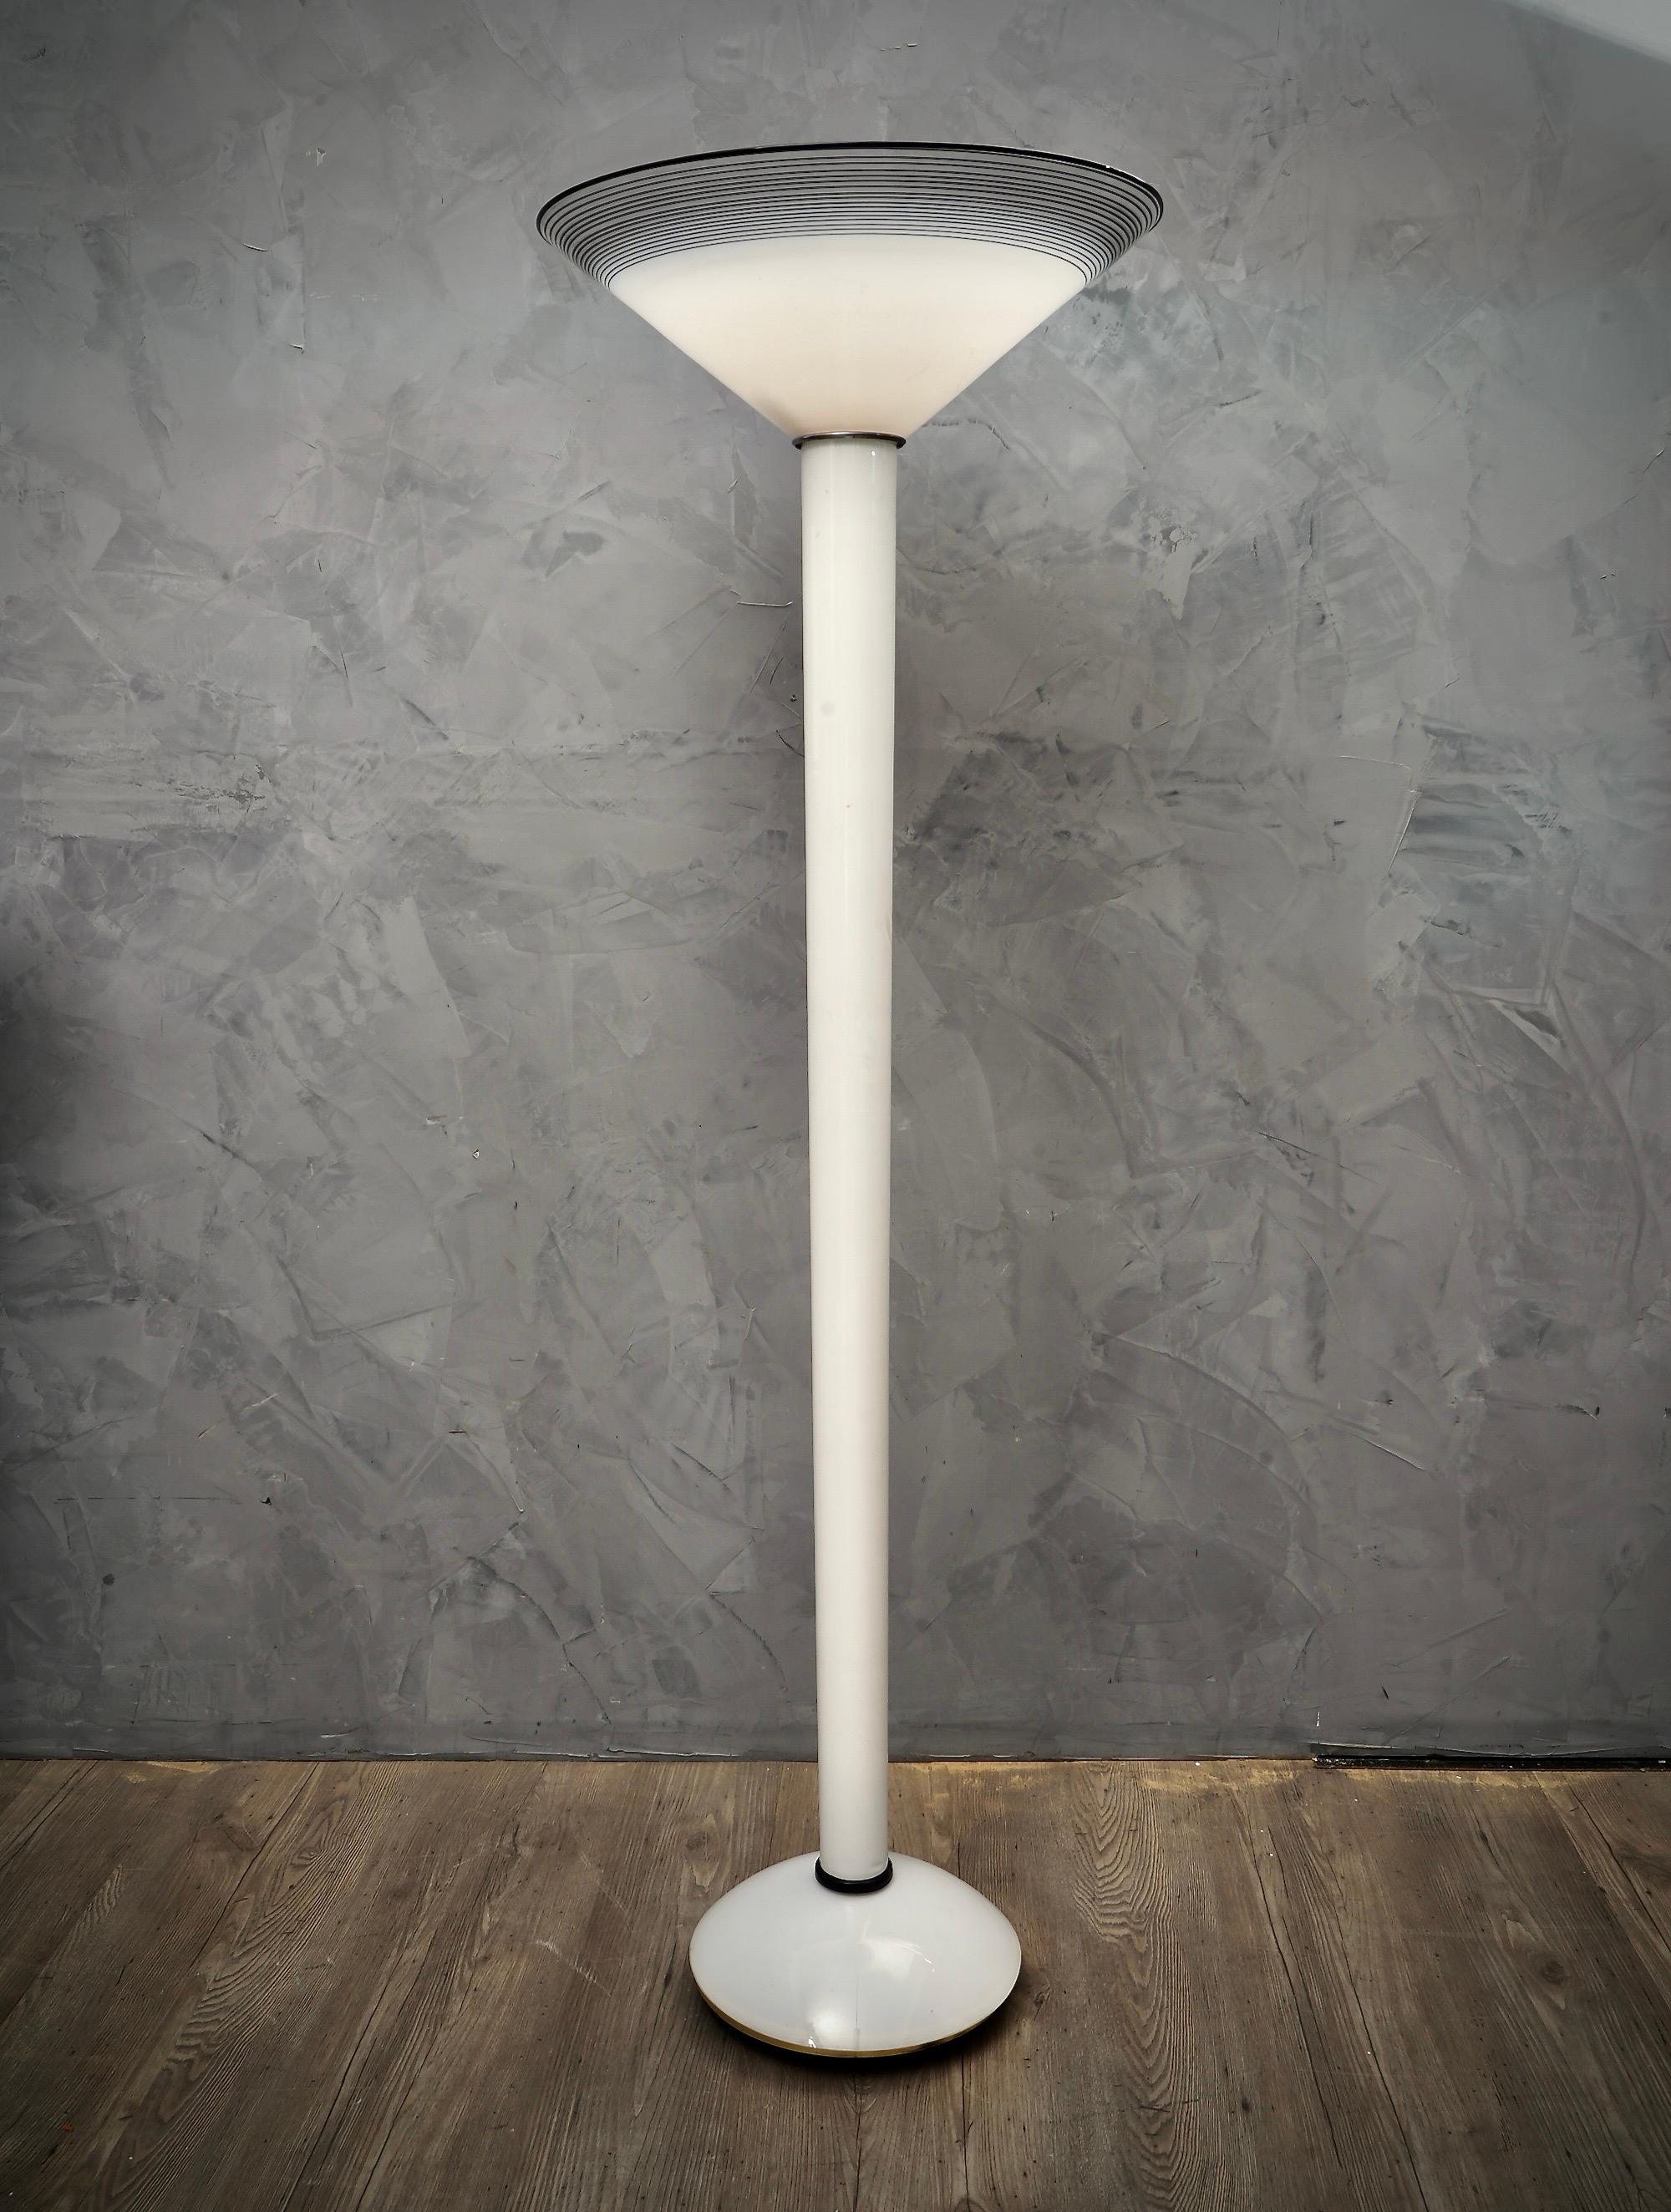 Linear and stylish floor lamp, characterized by a huge flared cup on the head. Ice white and strong black are the character of the floor lamp.

The floor lamp is made up of a central stem in white Murano glass, which carries a large flared white cup